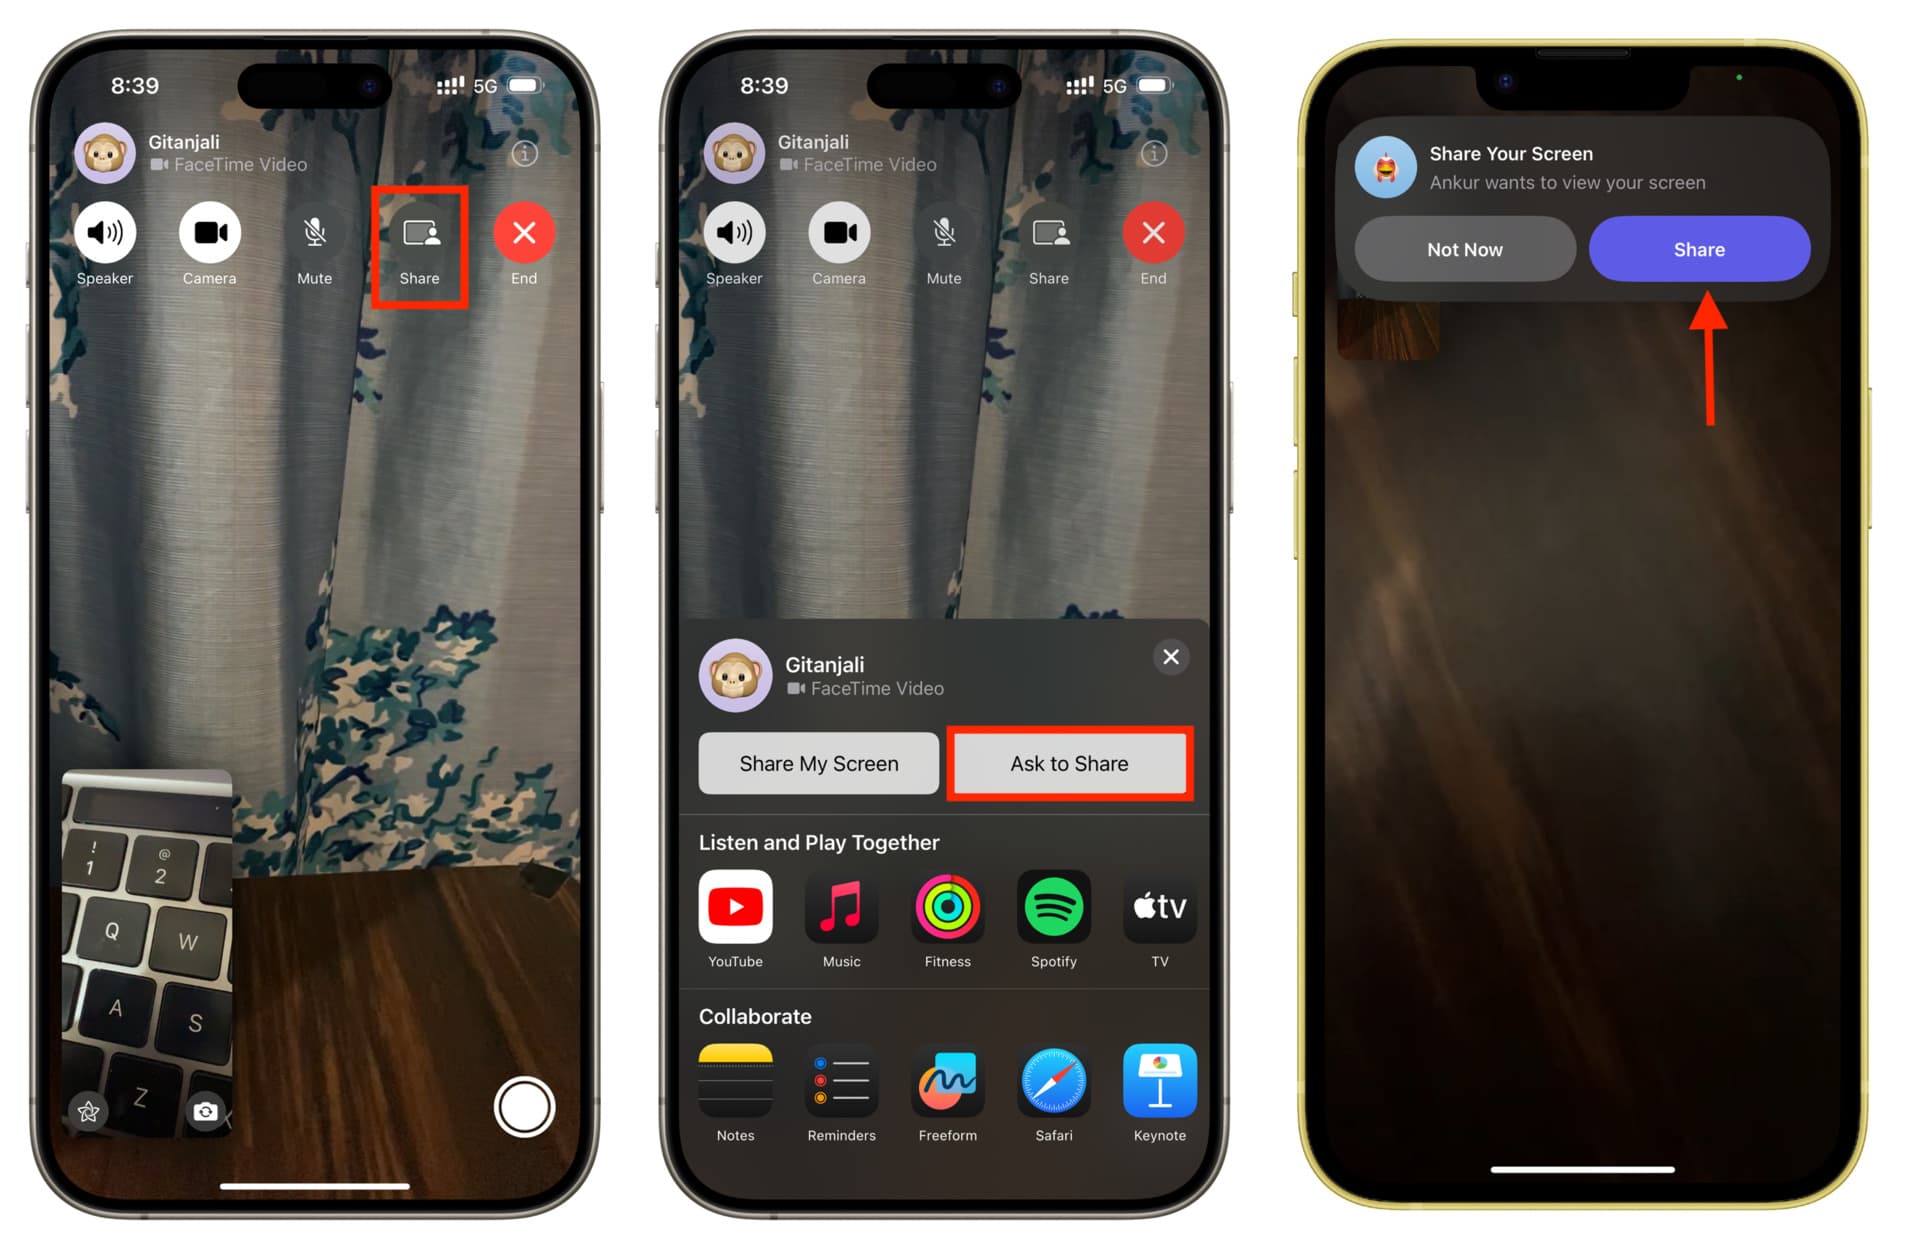 Ask to Share screen in FaceTime on iPhone